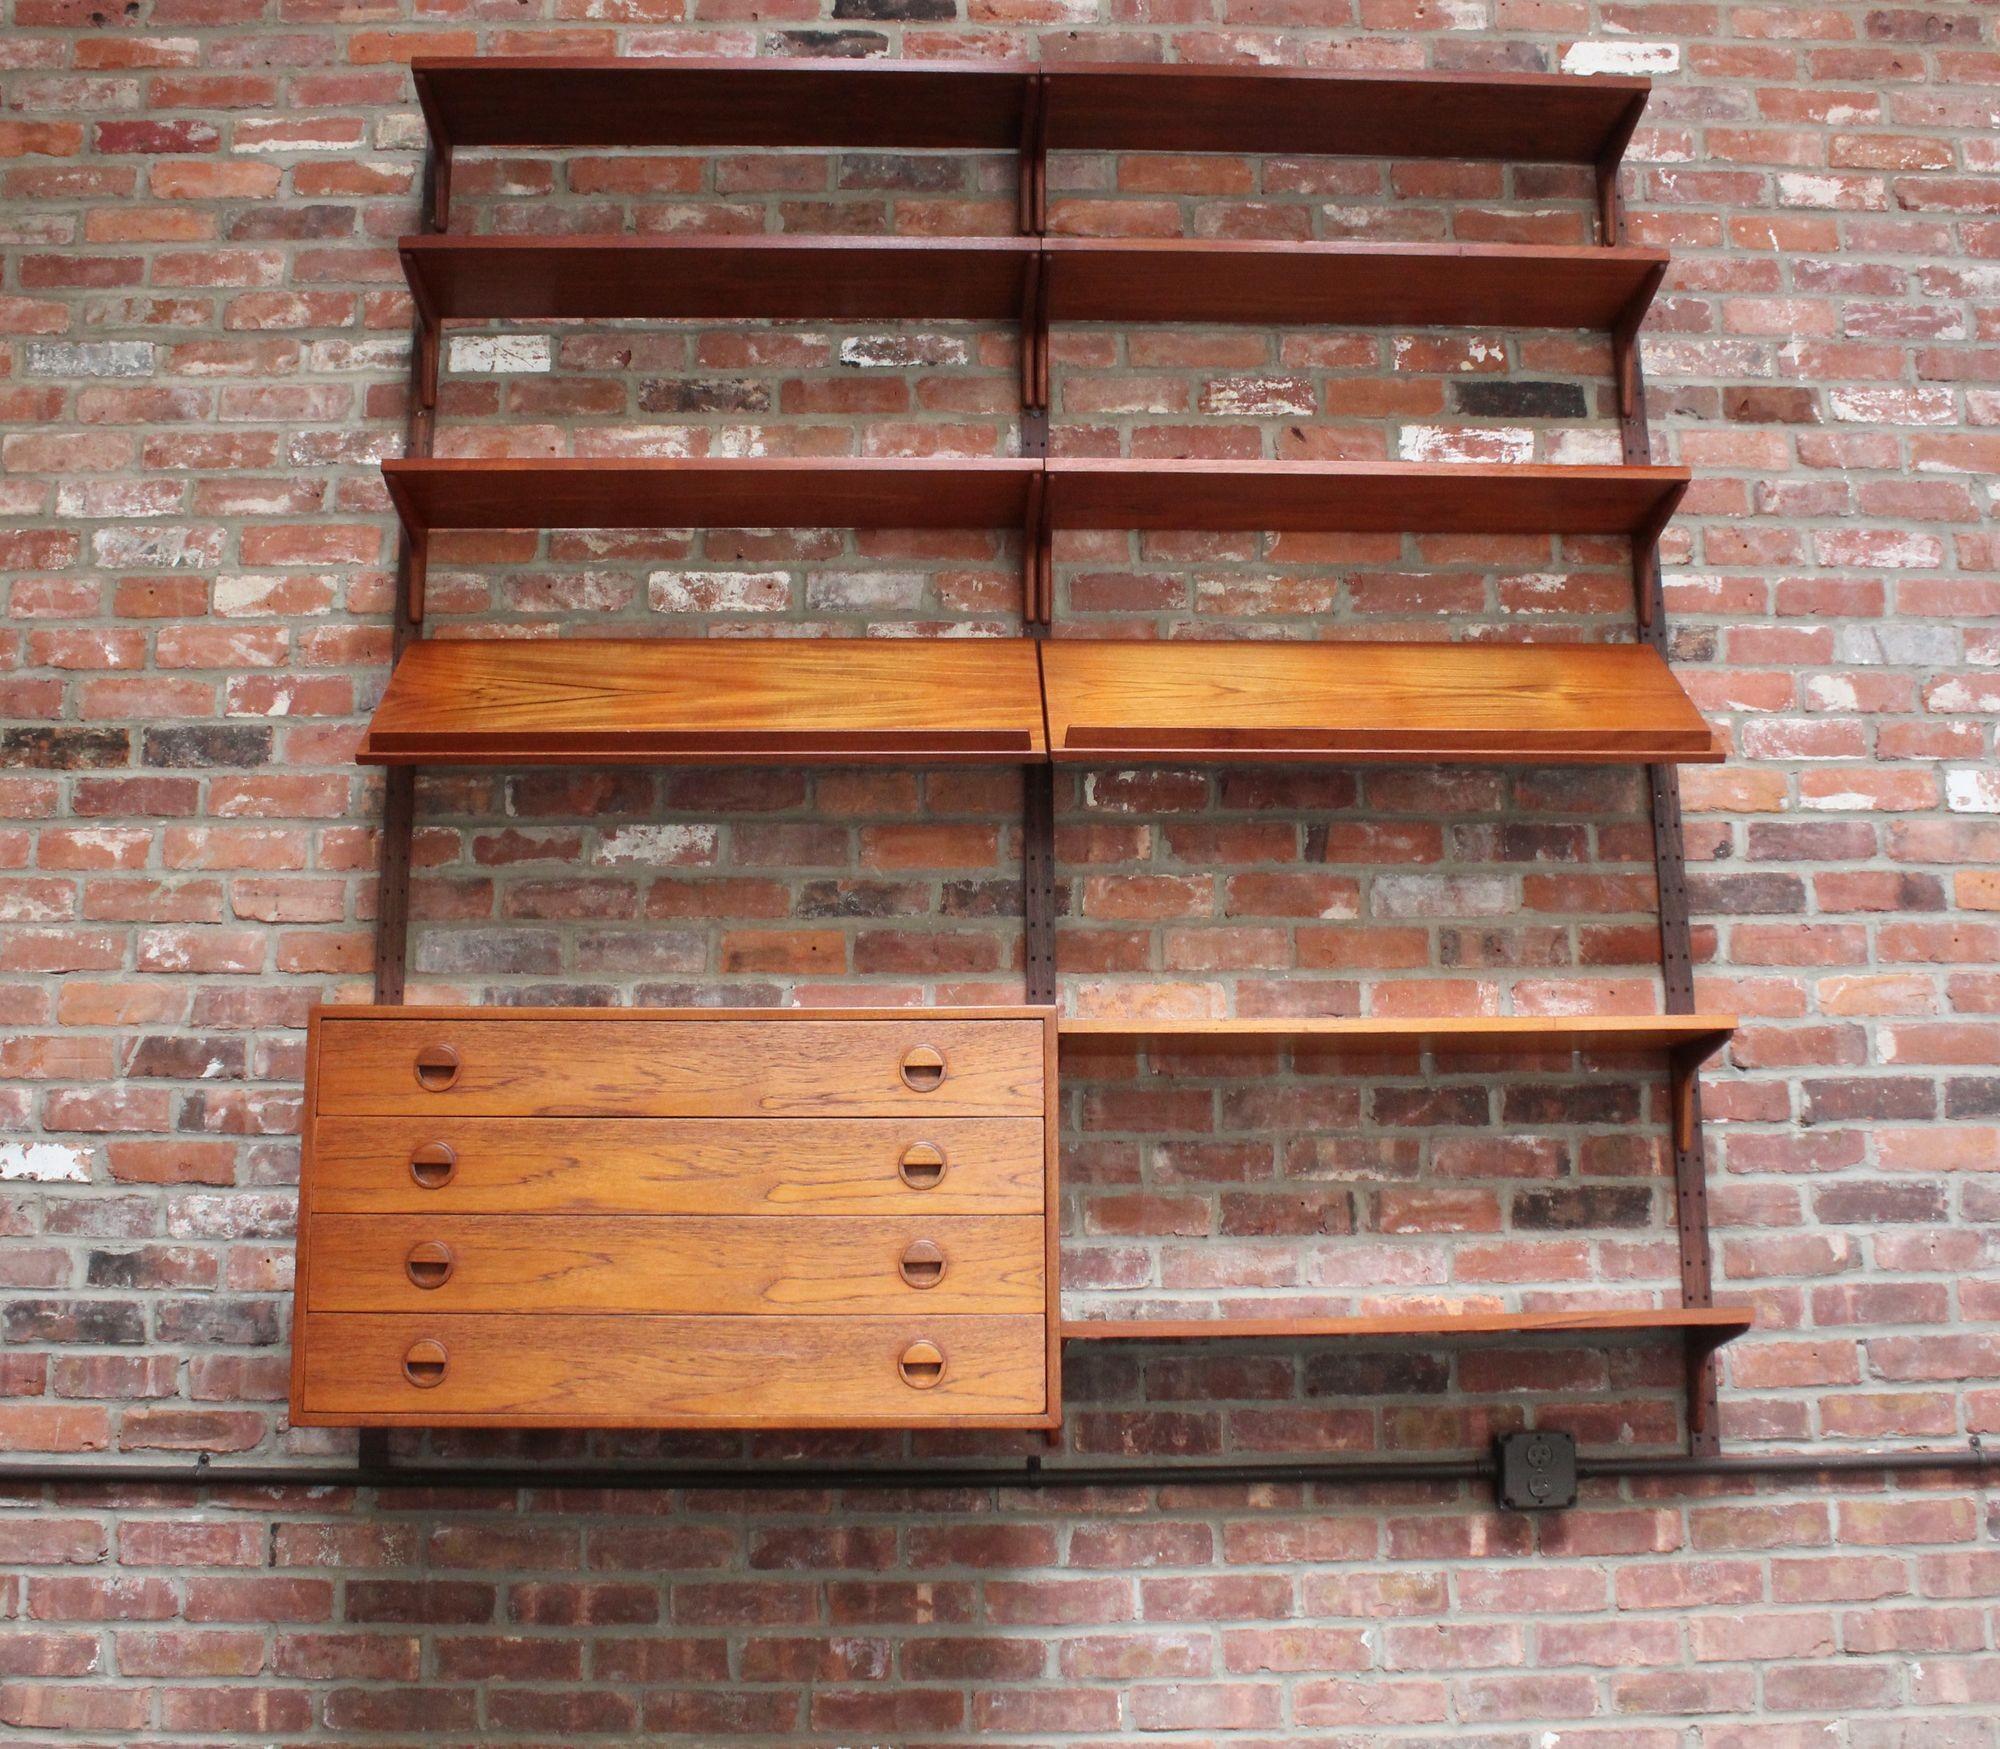 Mid-20th Century Danish Modern Teak and Rosewood Wall Unit Wall by Rud Thygesen & Johnny Sørensen For Sale